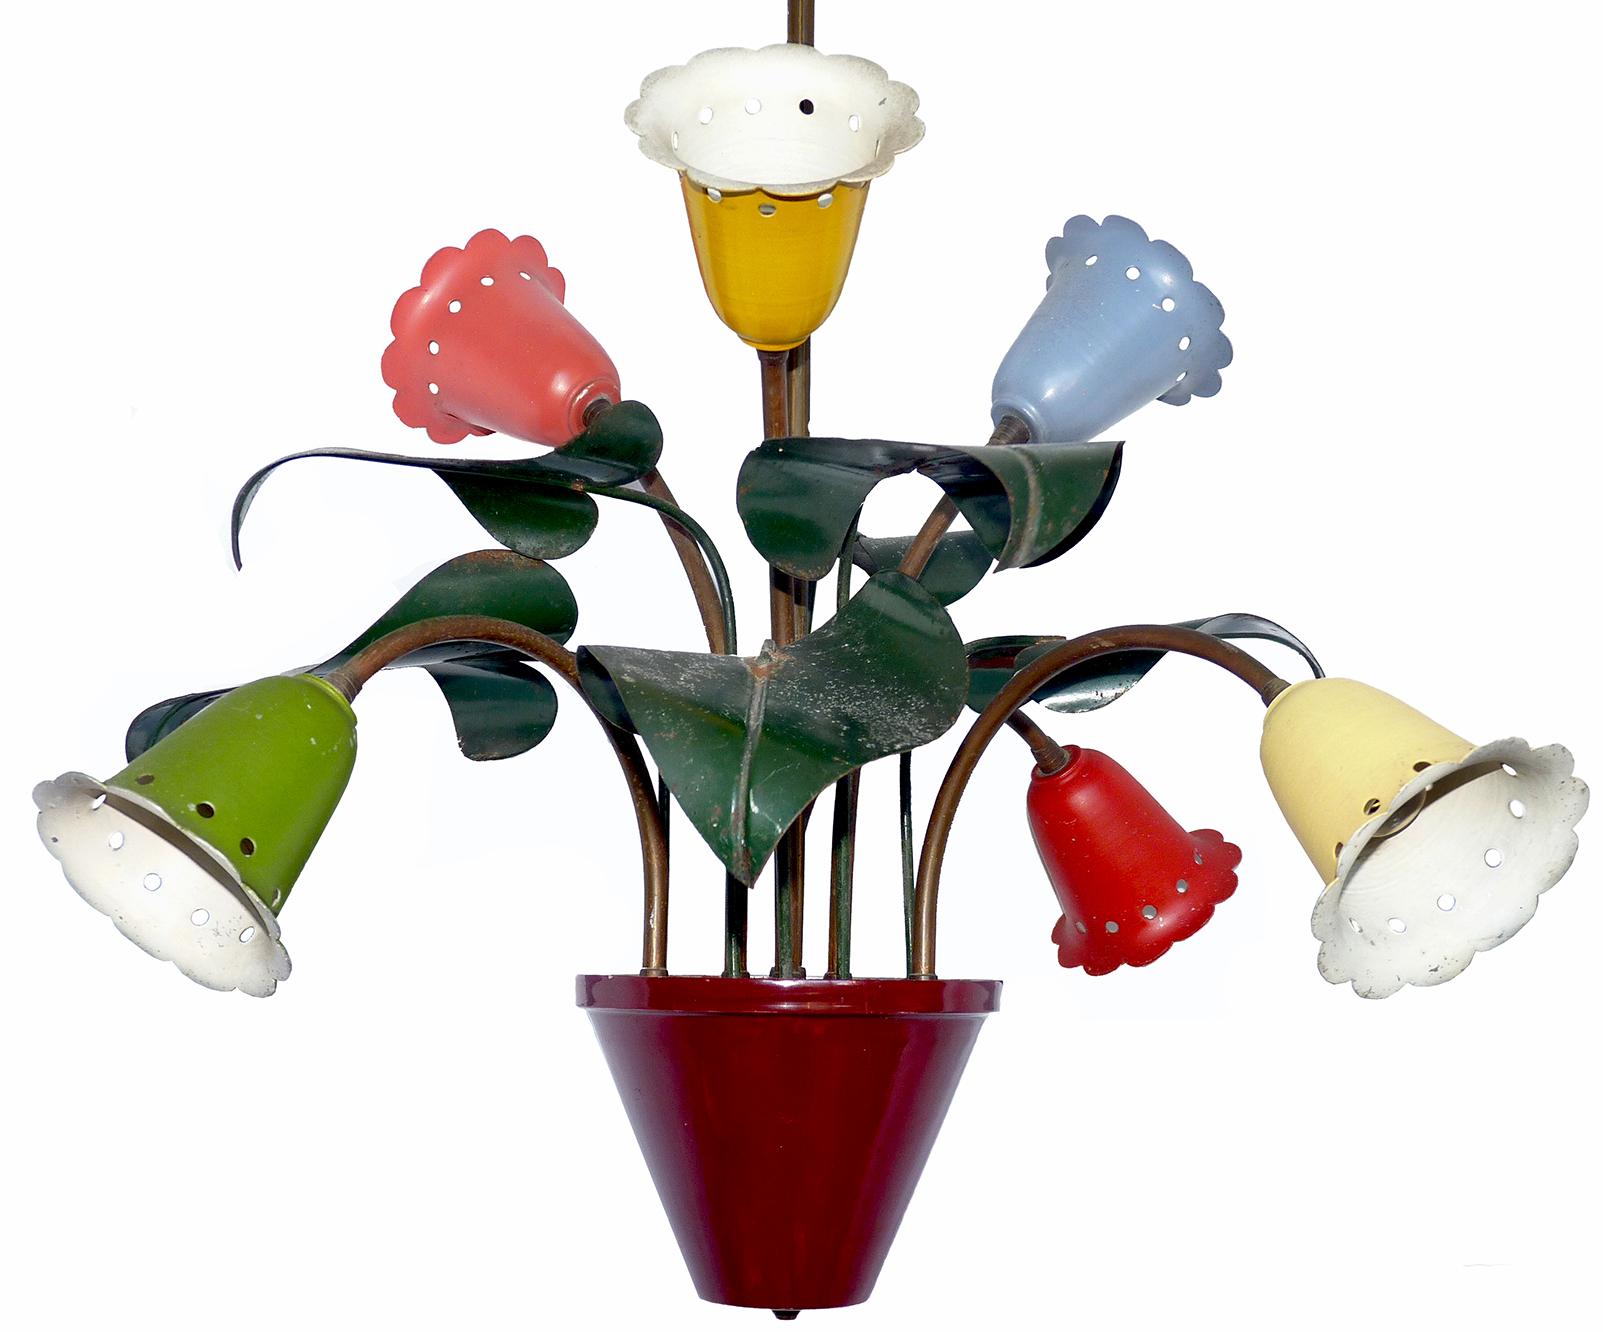 Midcentury modernist chandelier flower bouquet in the style of Stilnovo 6-light.
Measures:
Diameter 60 in/ 60 cm
Height 48 in/ 85 cm.
6 light bulbs/ Good working condition
 Assembly required. Bulbs not included.
Signs of wear on the paint. Signs of